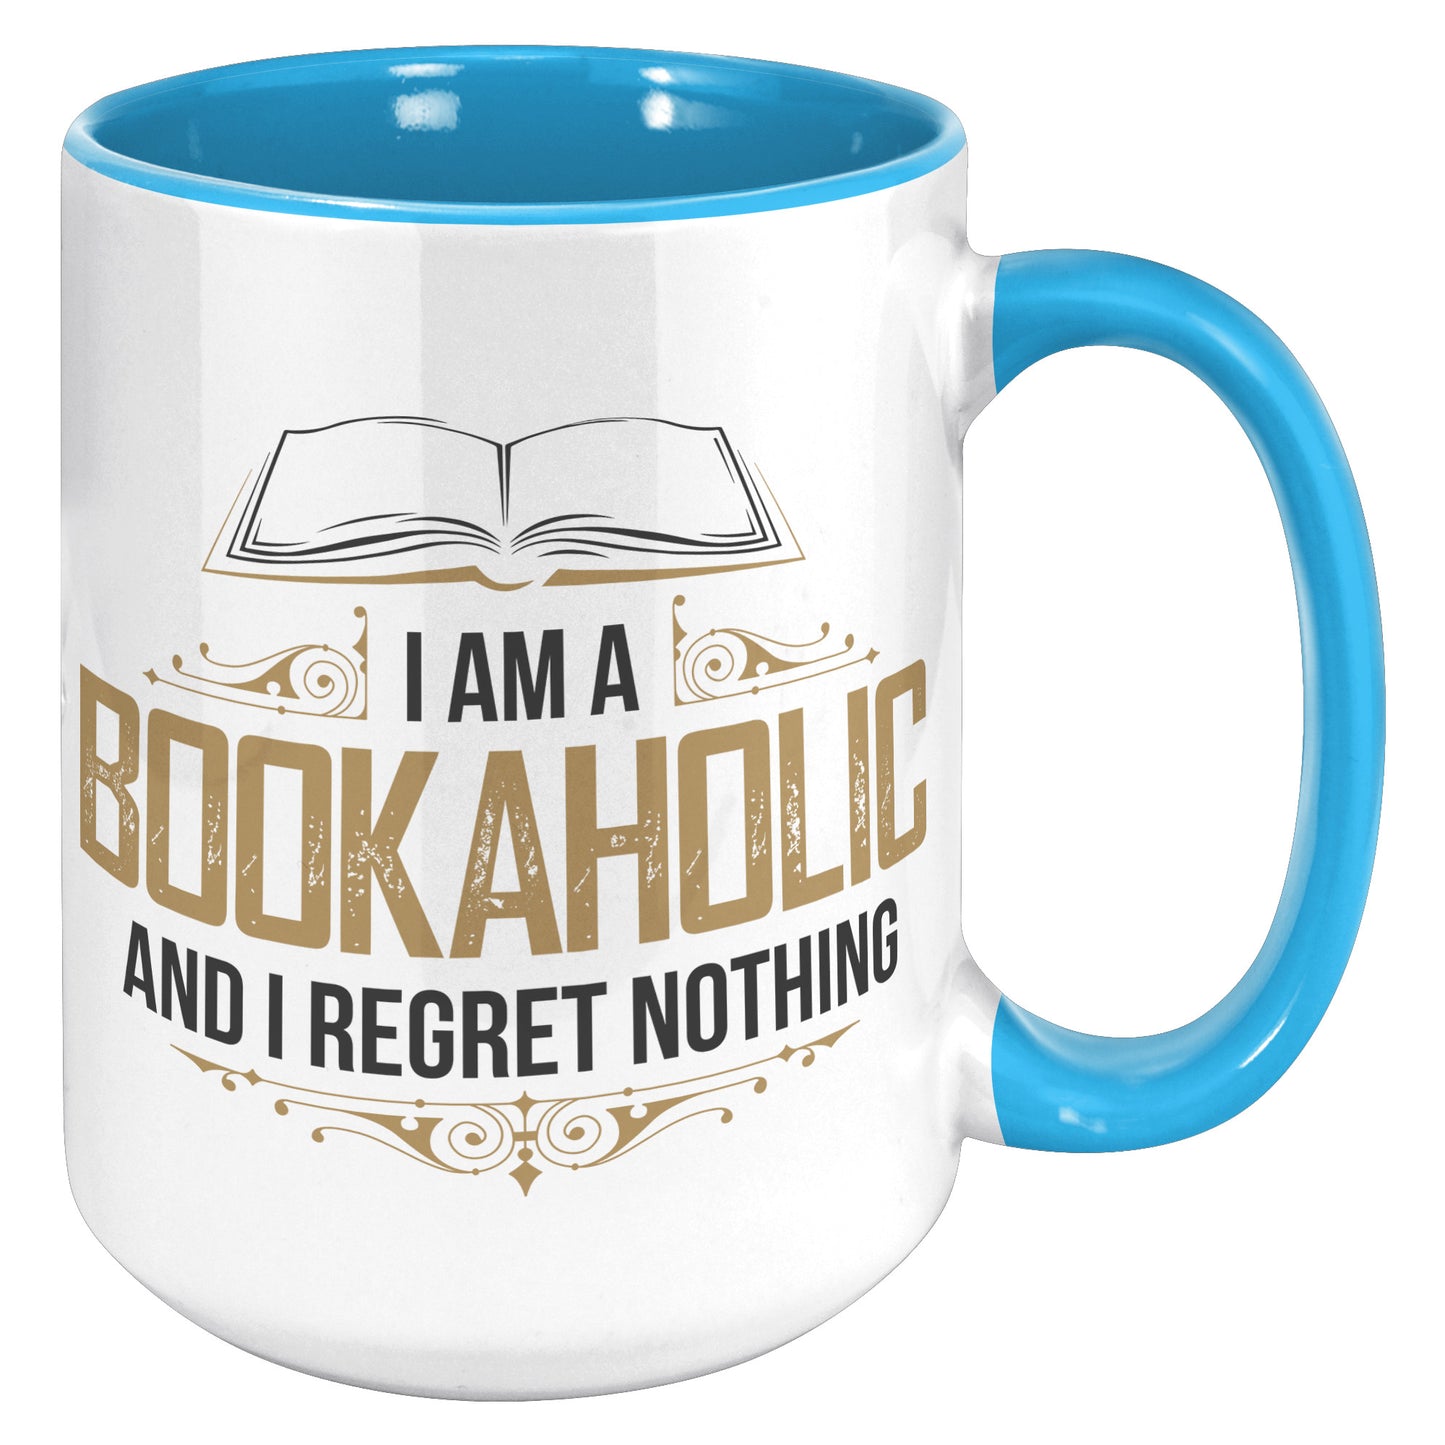 I Am A Bookaholic And I Regret Nothing | Accent Mug